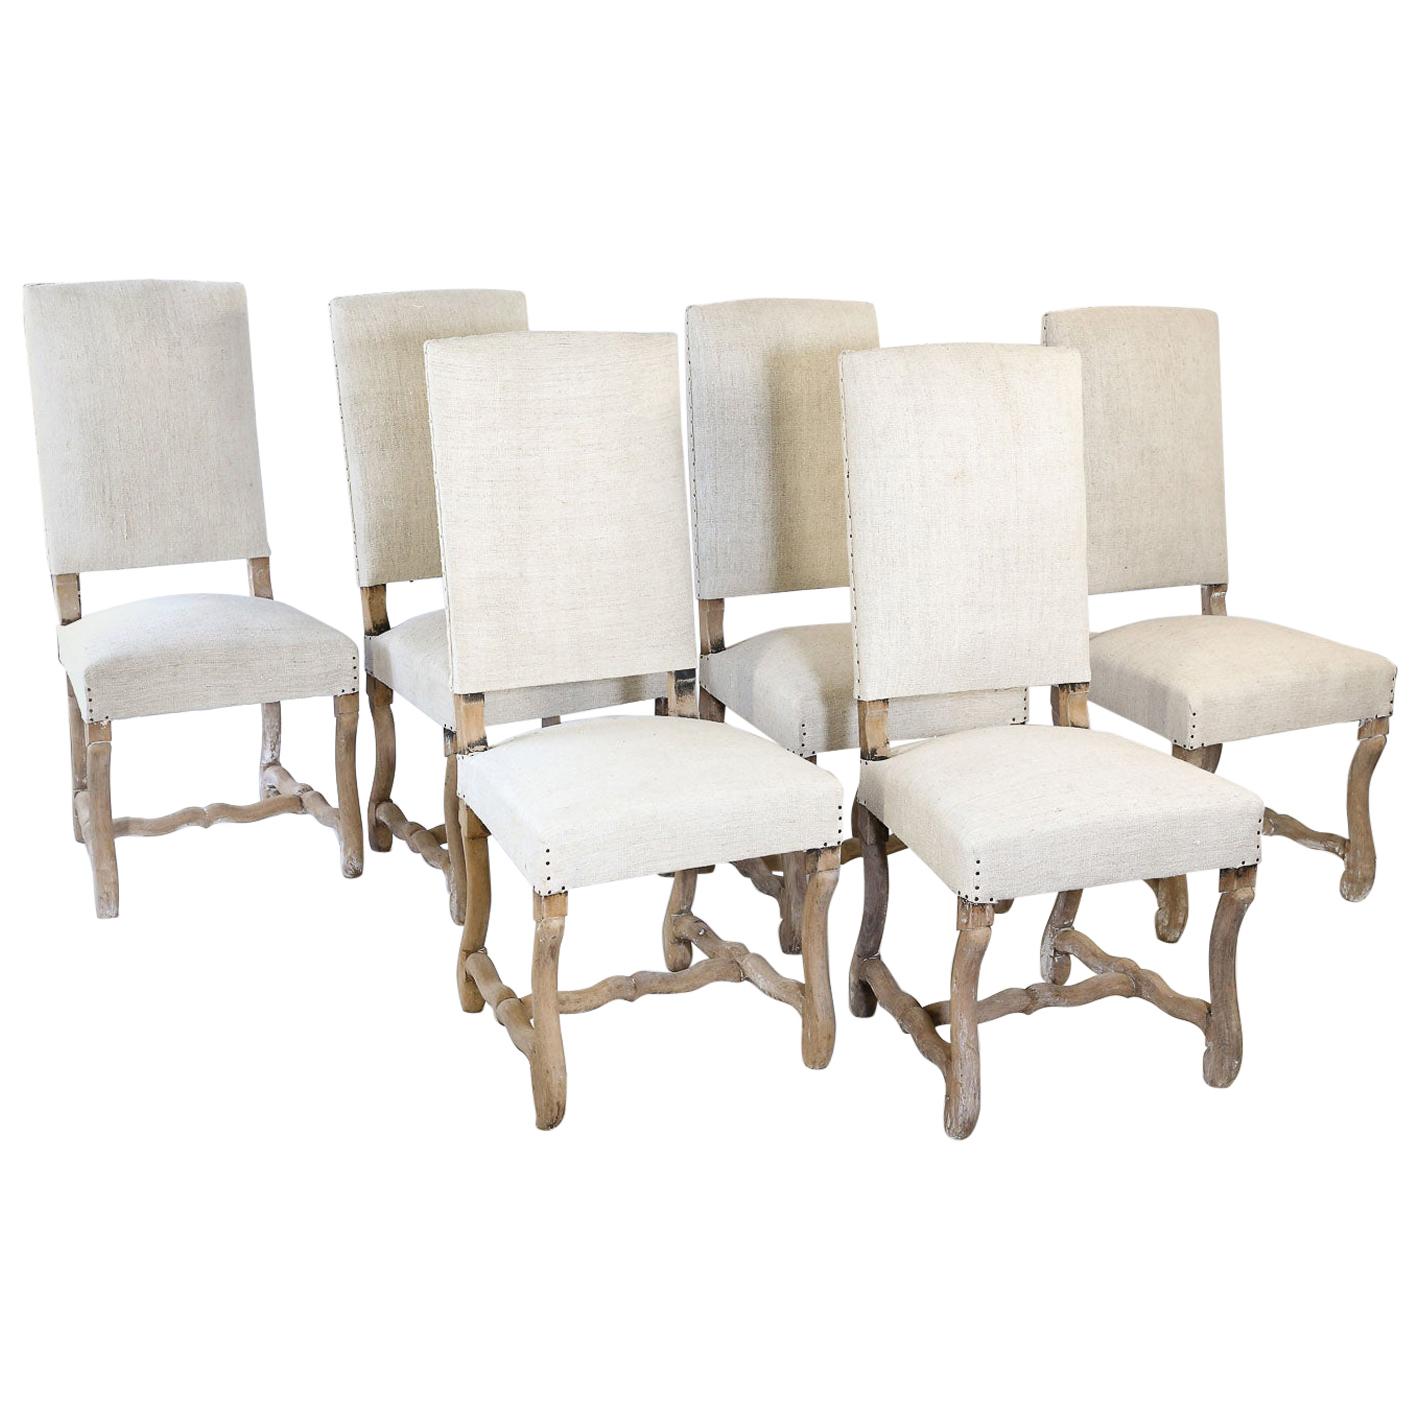 Set of Six Antique French Mutton Leg Chairs